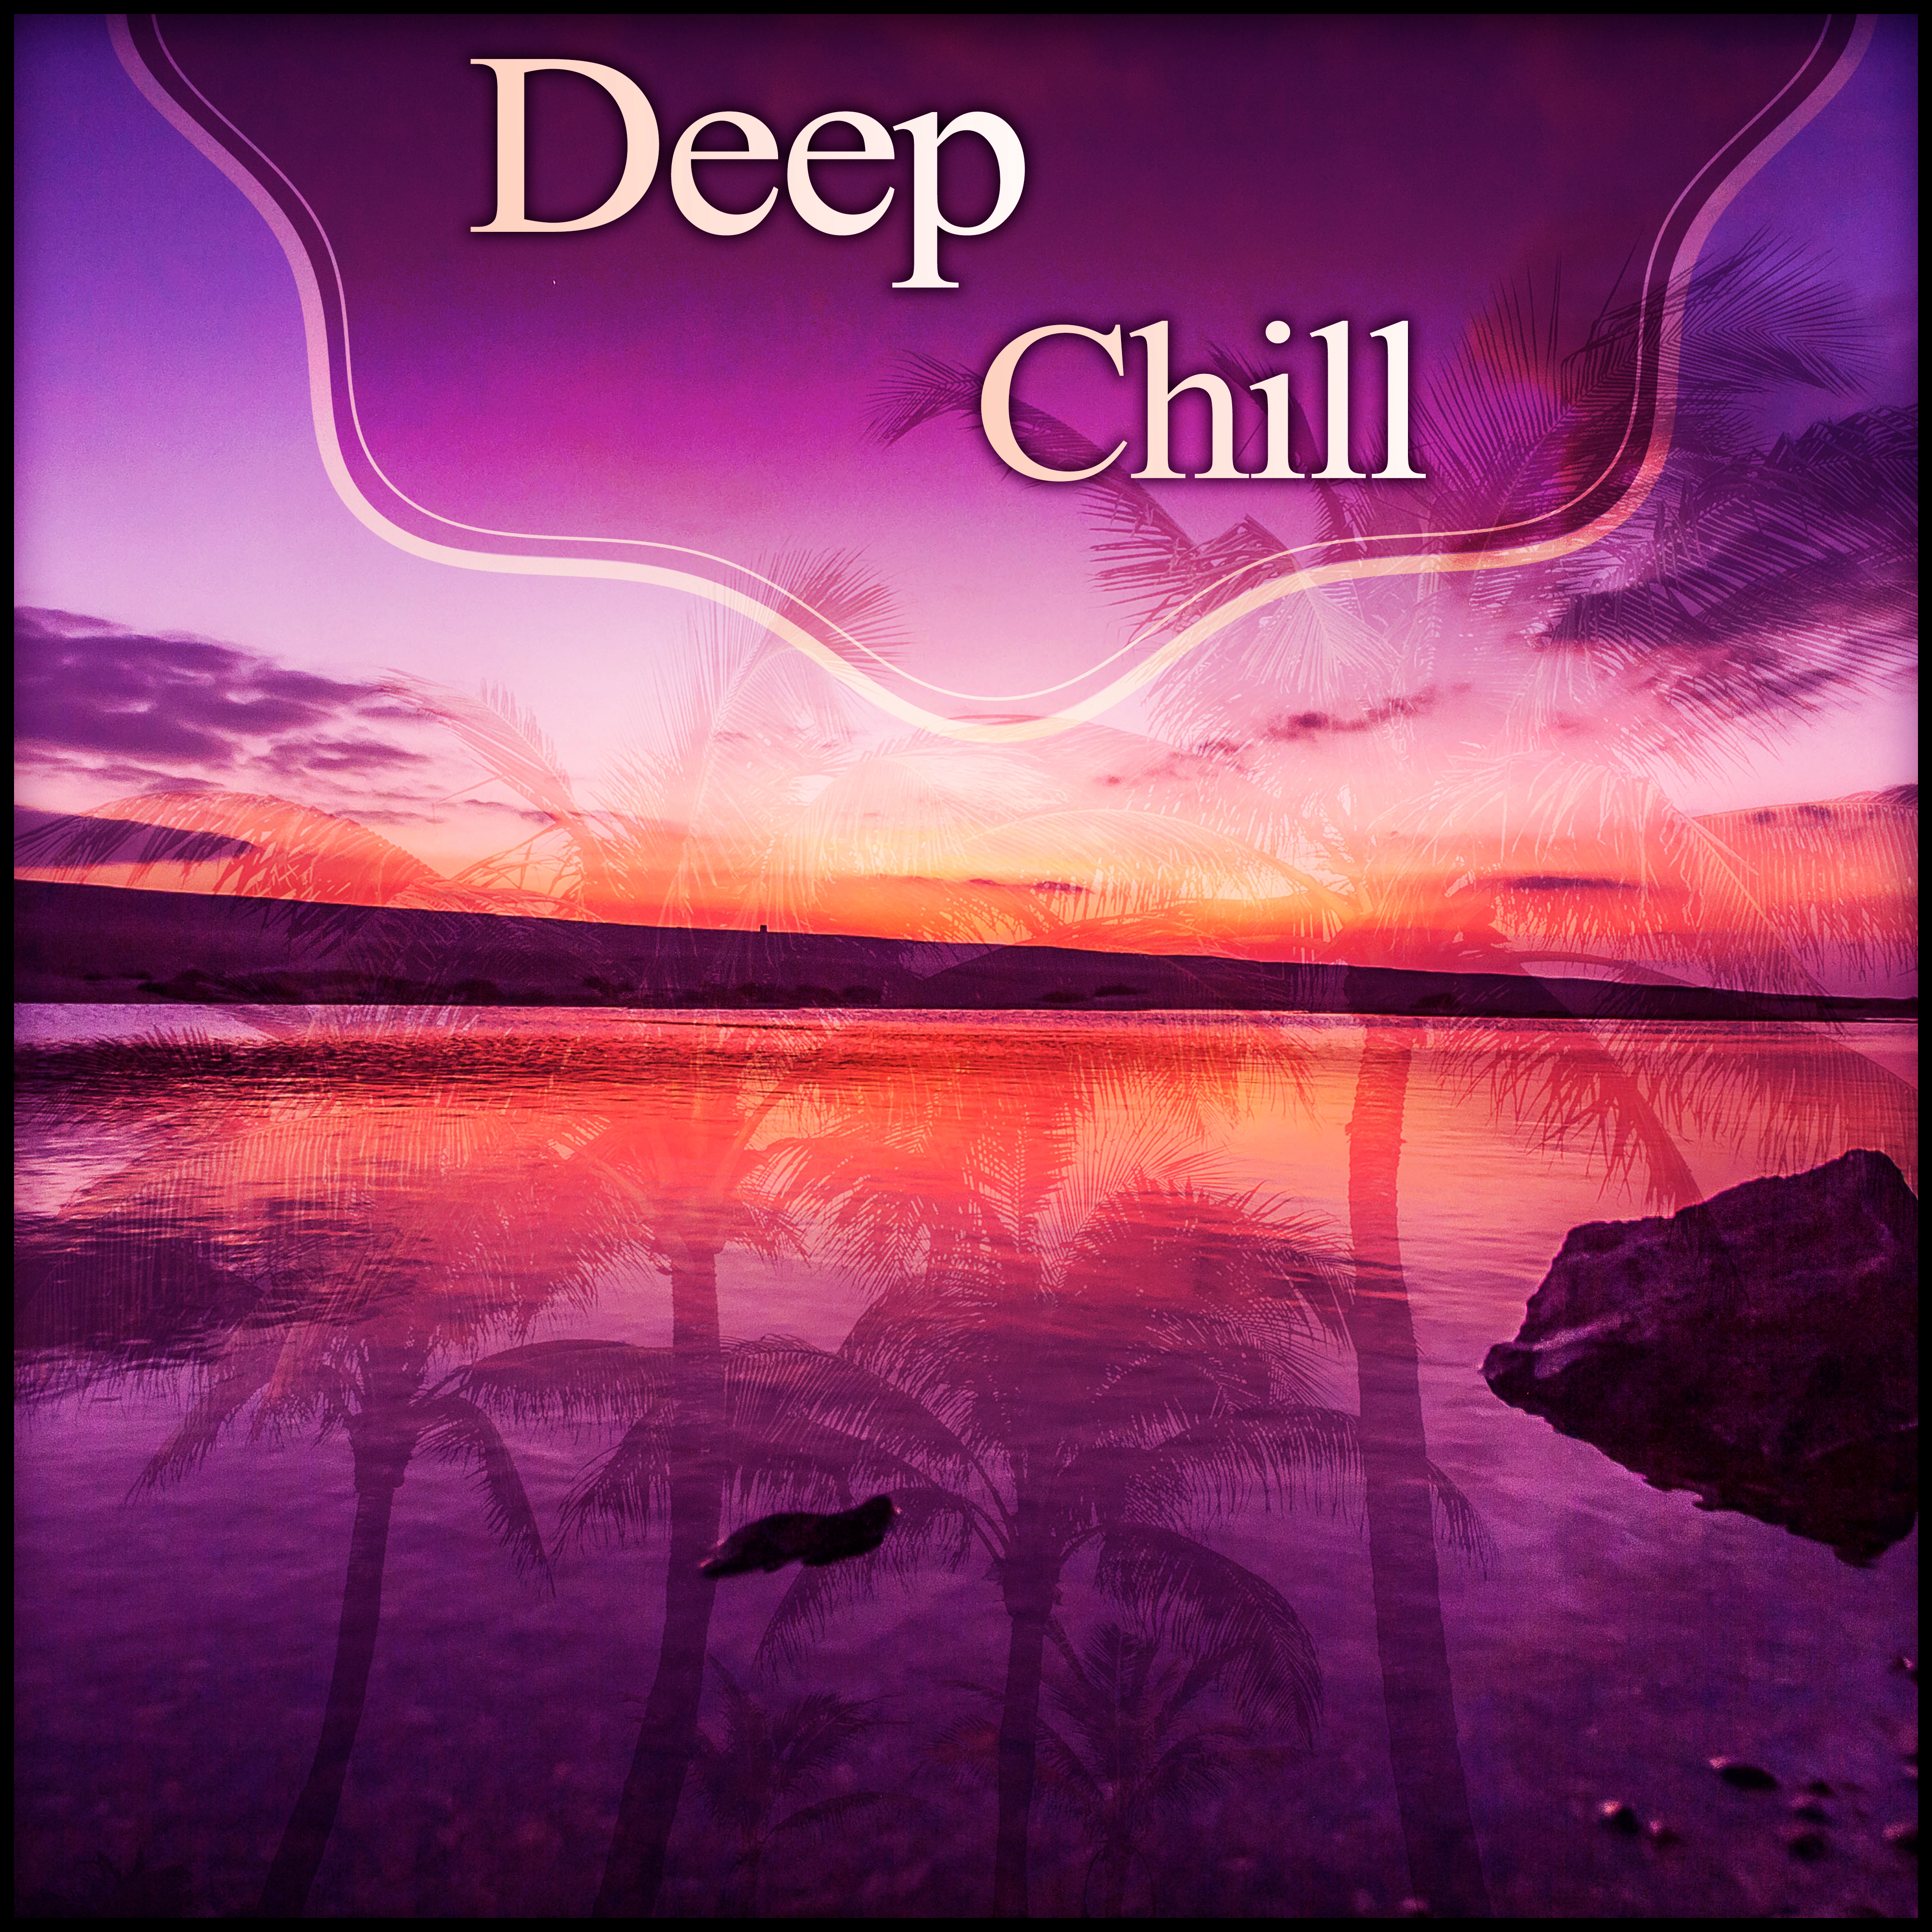 Deep Chill – Chill Out Sounds, Calm Music for Relax & Chill Out, Summer Time